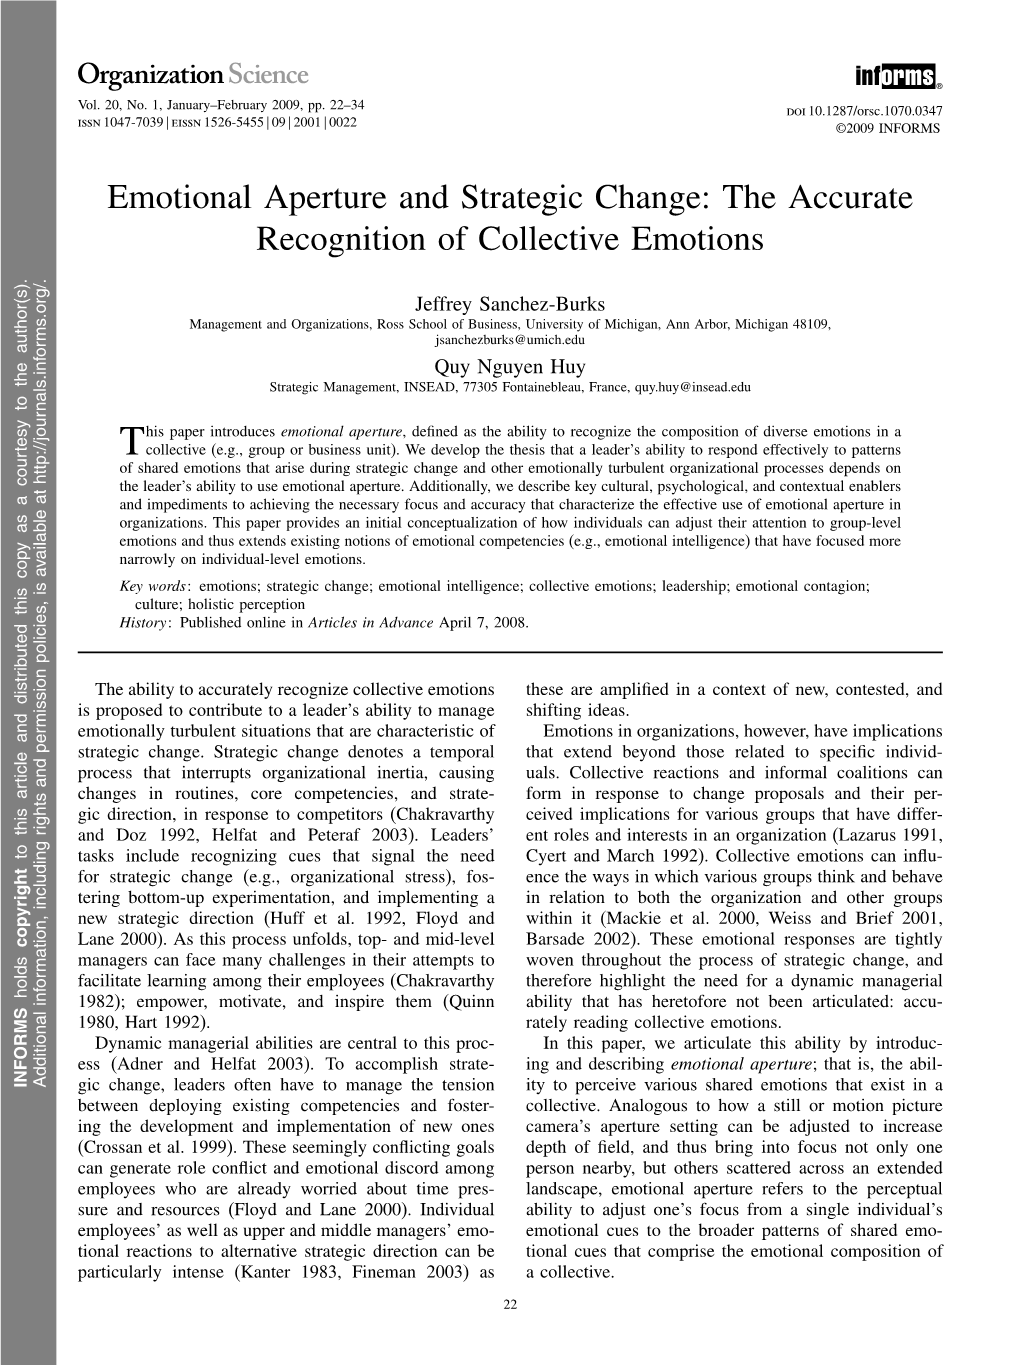 Emotional Aperture and Strategic Change: the Accurate Recognition of Collective Emotions